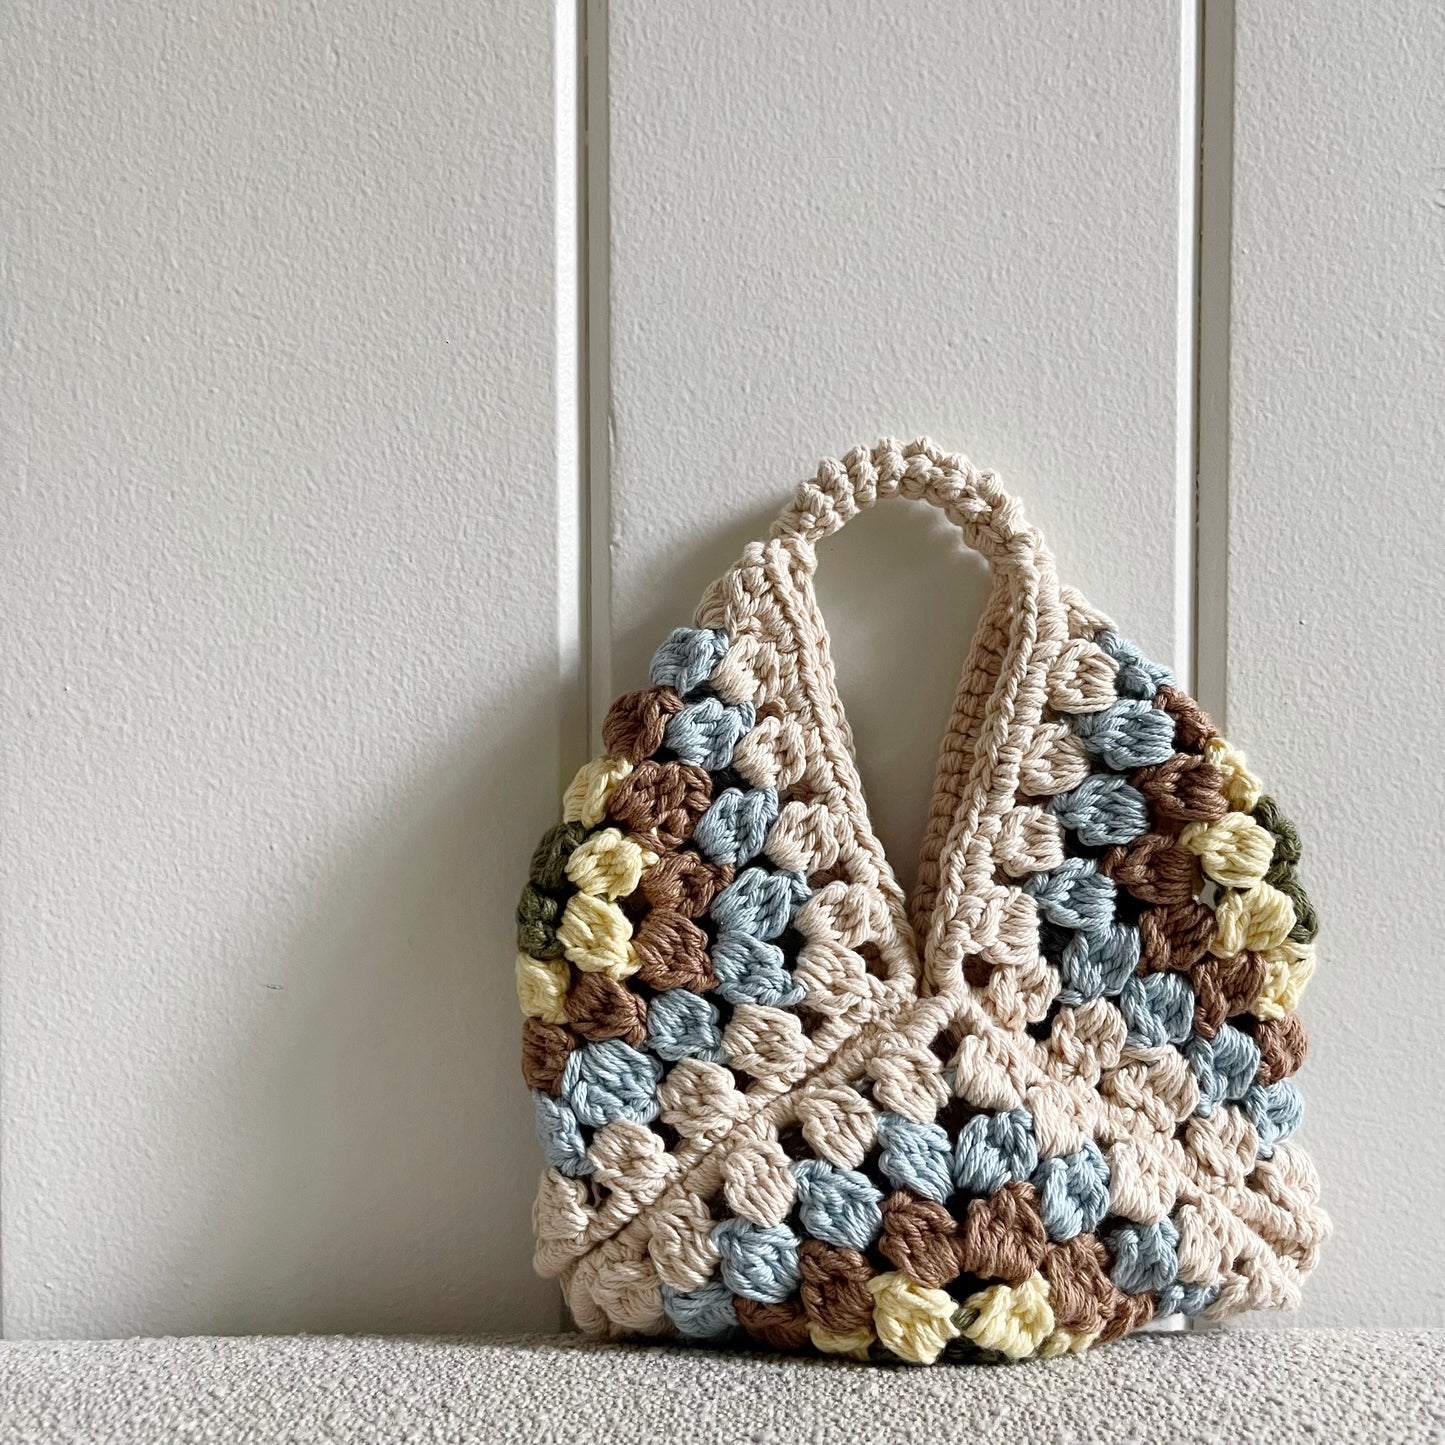 rochet granny square handbag  Measures 11 by 9 inches. Made of 100% cotton in colors cream, baby blue, light brown, light yellow and military green. 